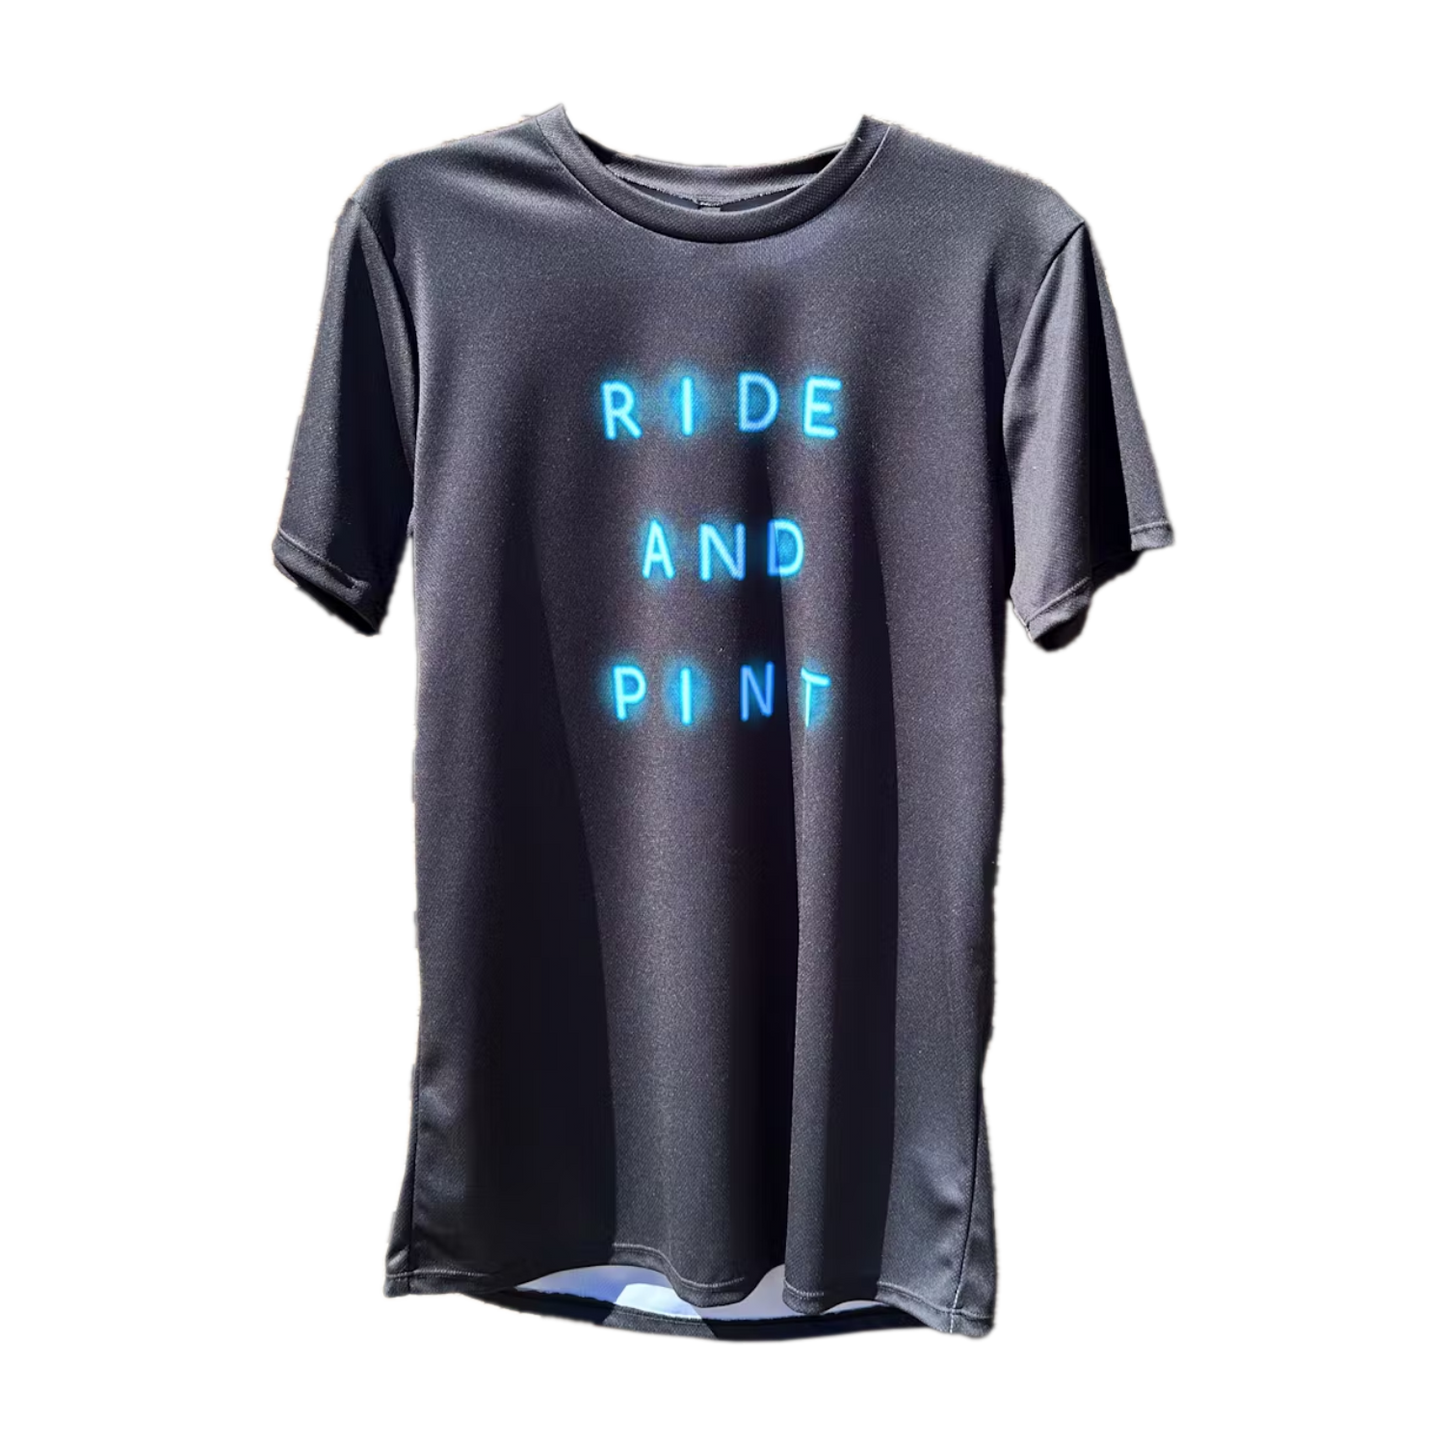 Shirt with text "Ride and Pint" on front